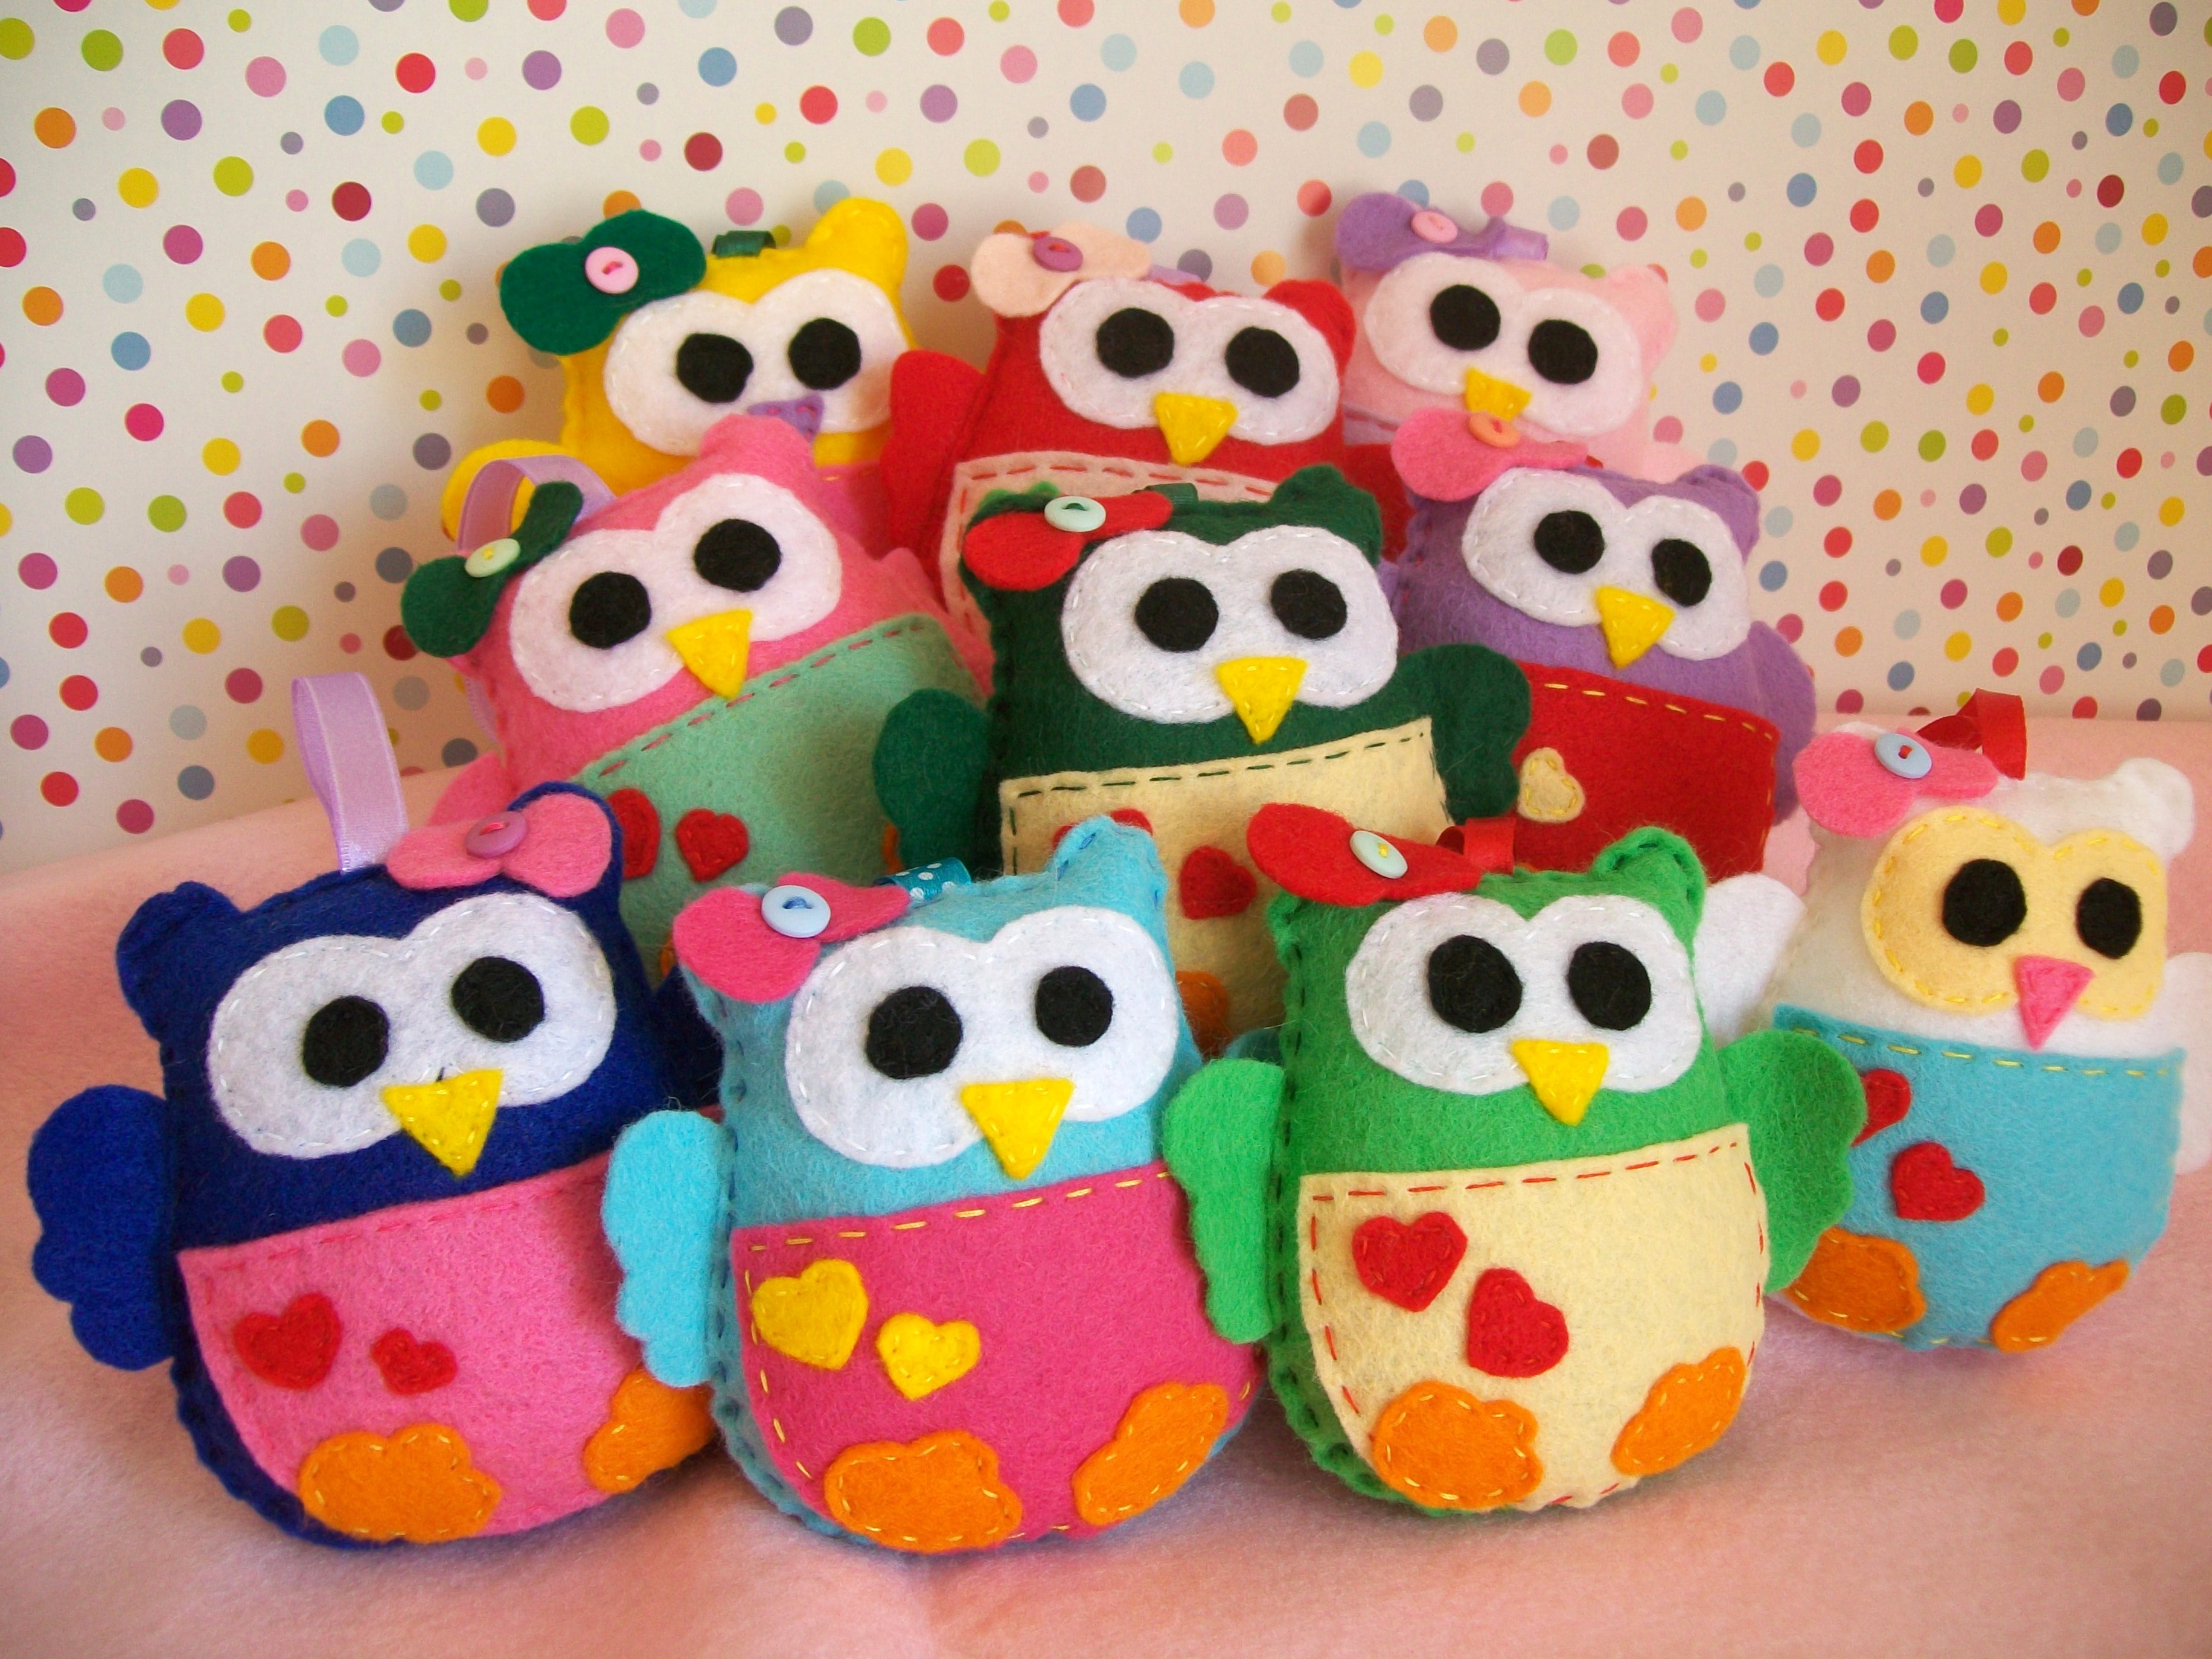 Cute owl softies for nursery decoration, Christmas ornaments or party 